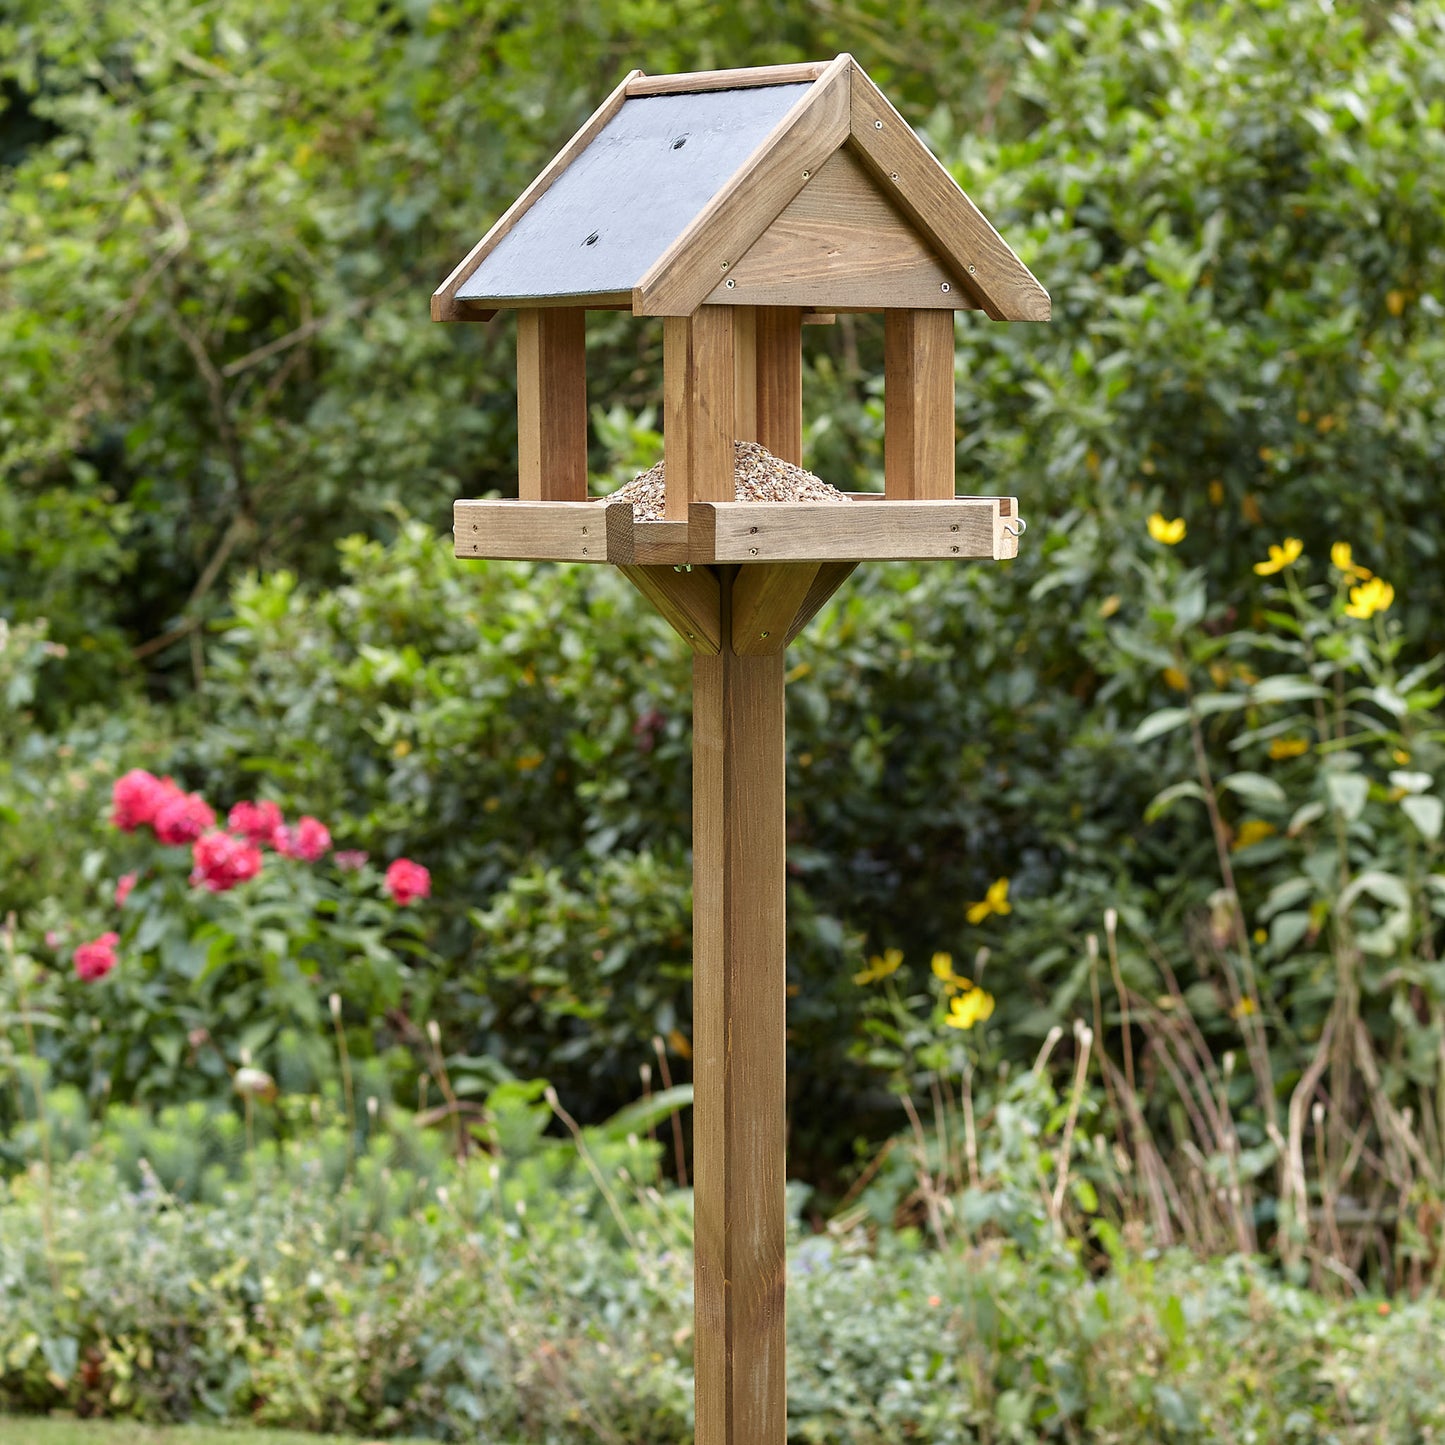 Peckish Complete Bird Table with bird seed on